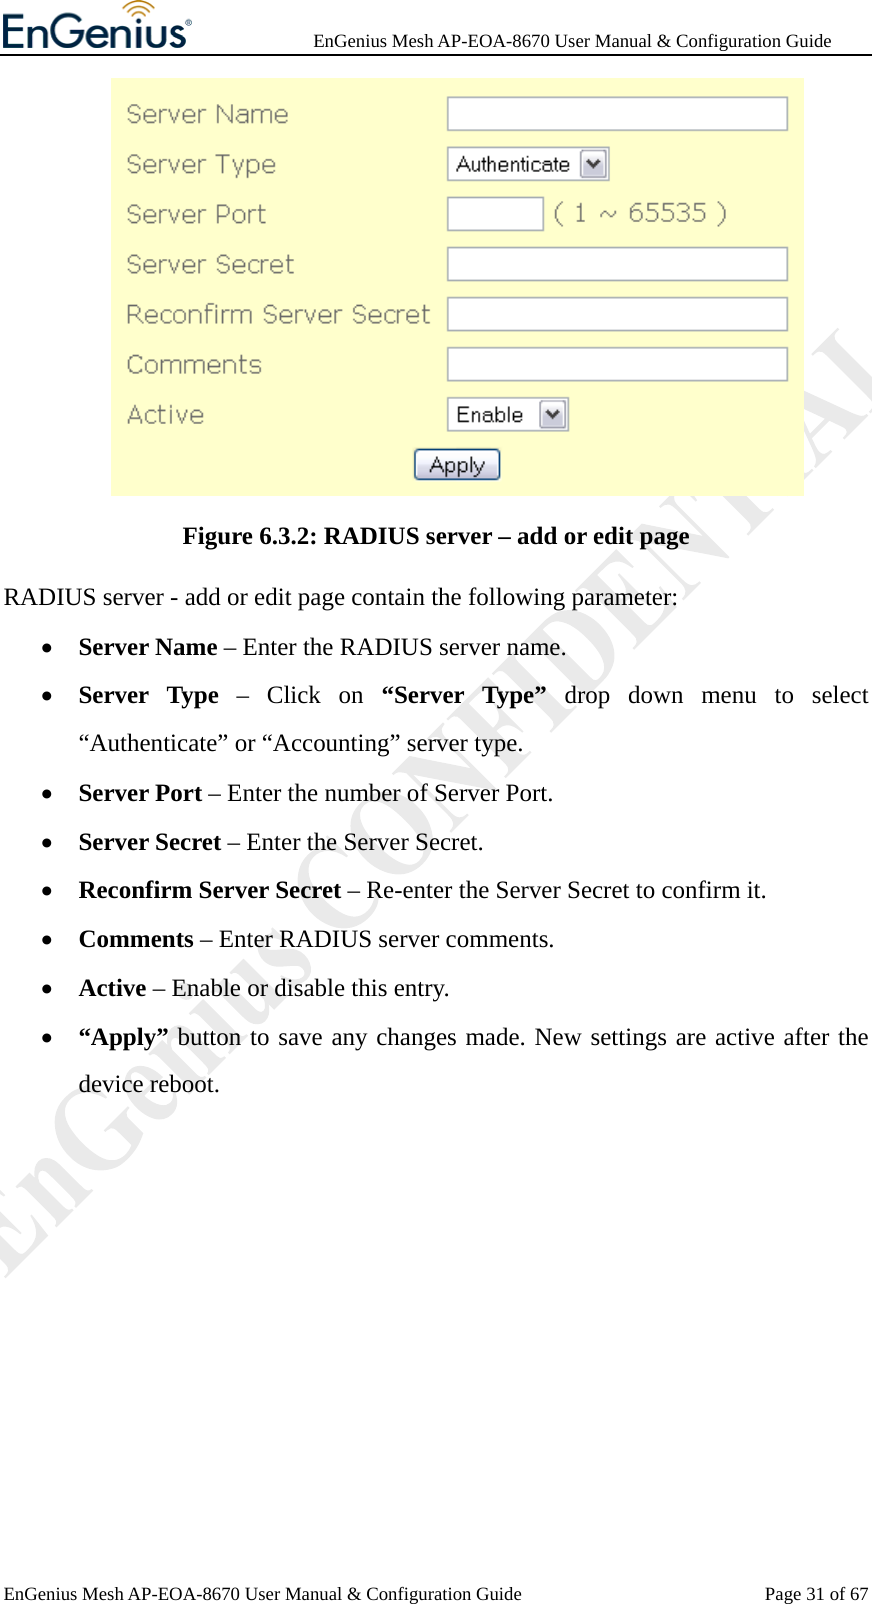              EnGenius Mesh AP-EOA-8670 User Manual &amp; Configuration Guide EnGenius Mesh AP-EOA-8670 User Manual &amp; Configuration Guide  Page 31 of 67 Figure 6.3.2: RADIUS server – add or edit page RADIUS server - add or edit page contain the following parameter: • Server Name – Enter the RADIUS server name. • Server Type – Click on “Server Type” drop down menu to select “Authenticate” or “Accounting” server type. • Server Port – Enter the number of Server Port. • Server Secret – Enter the Server Secret. • Reconfirm Server Secret – Re-enter the Server Secret to confirm it. • Comments – Enter RADIUS server comments. • Active – Enable or disable this entry. • “Apply” button to save any changes made. New settings are active after the device reboot.  